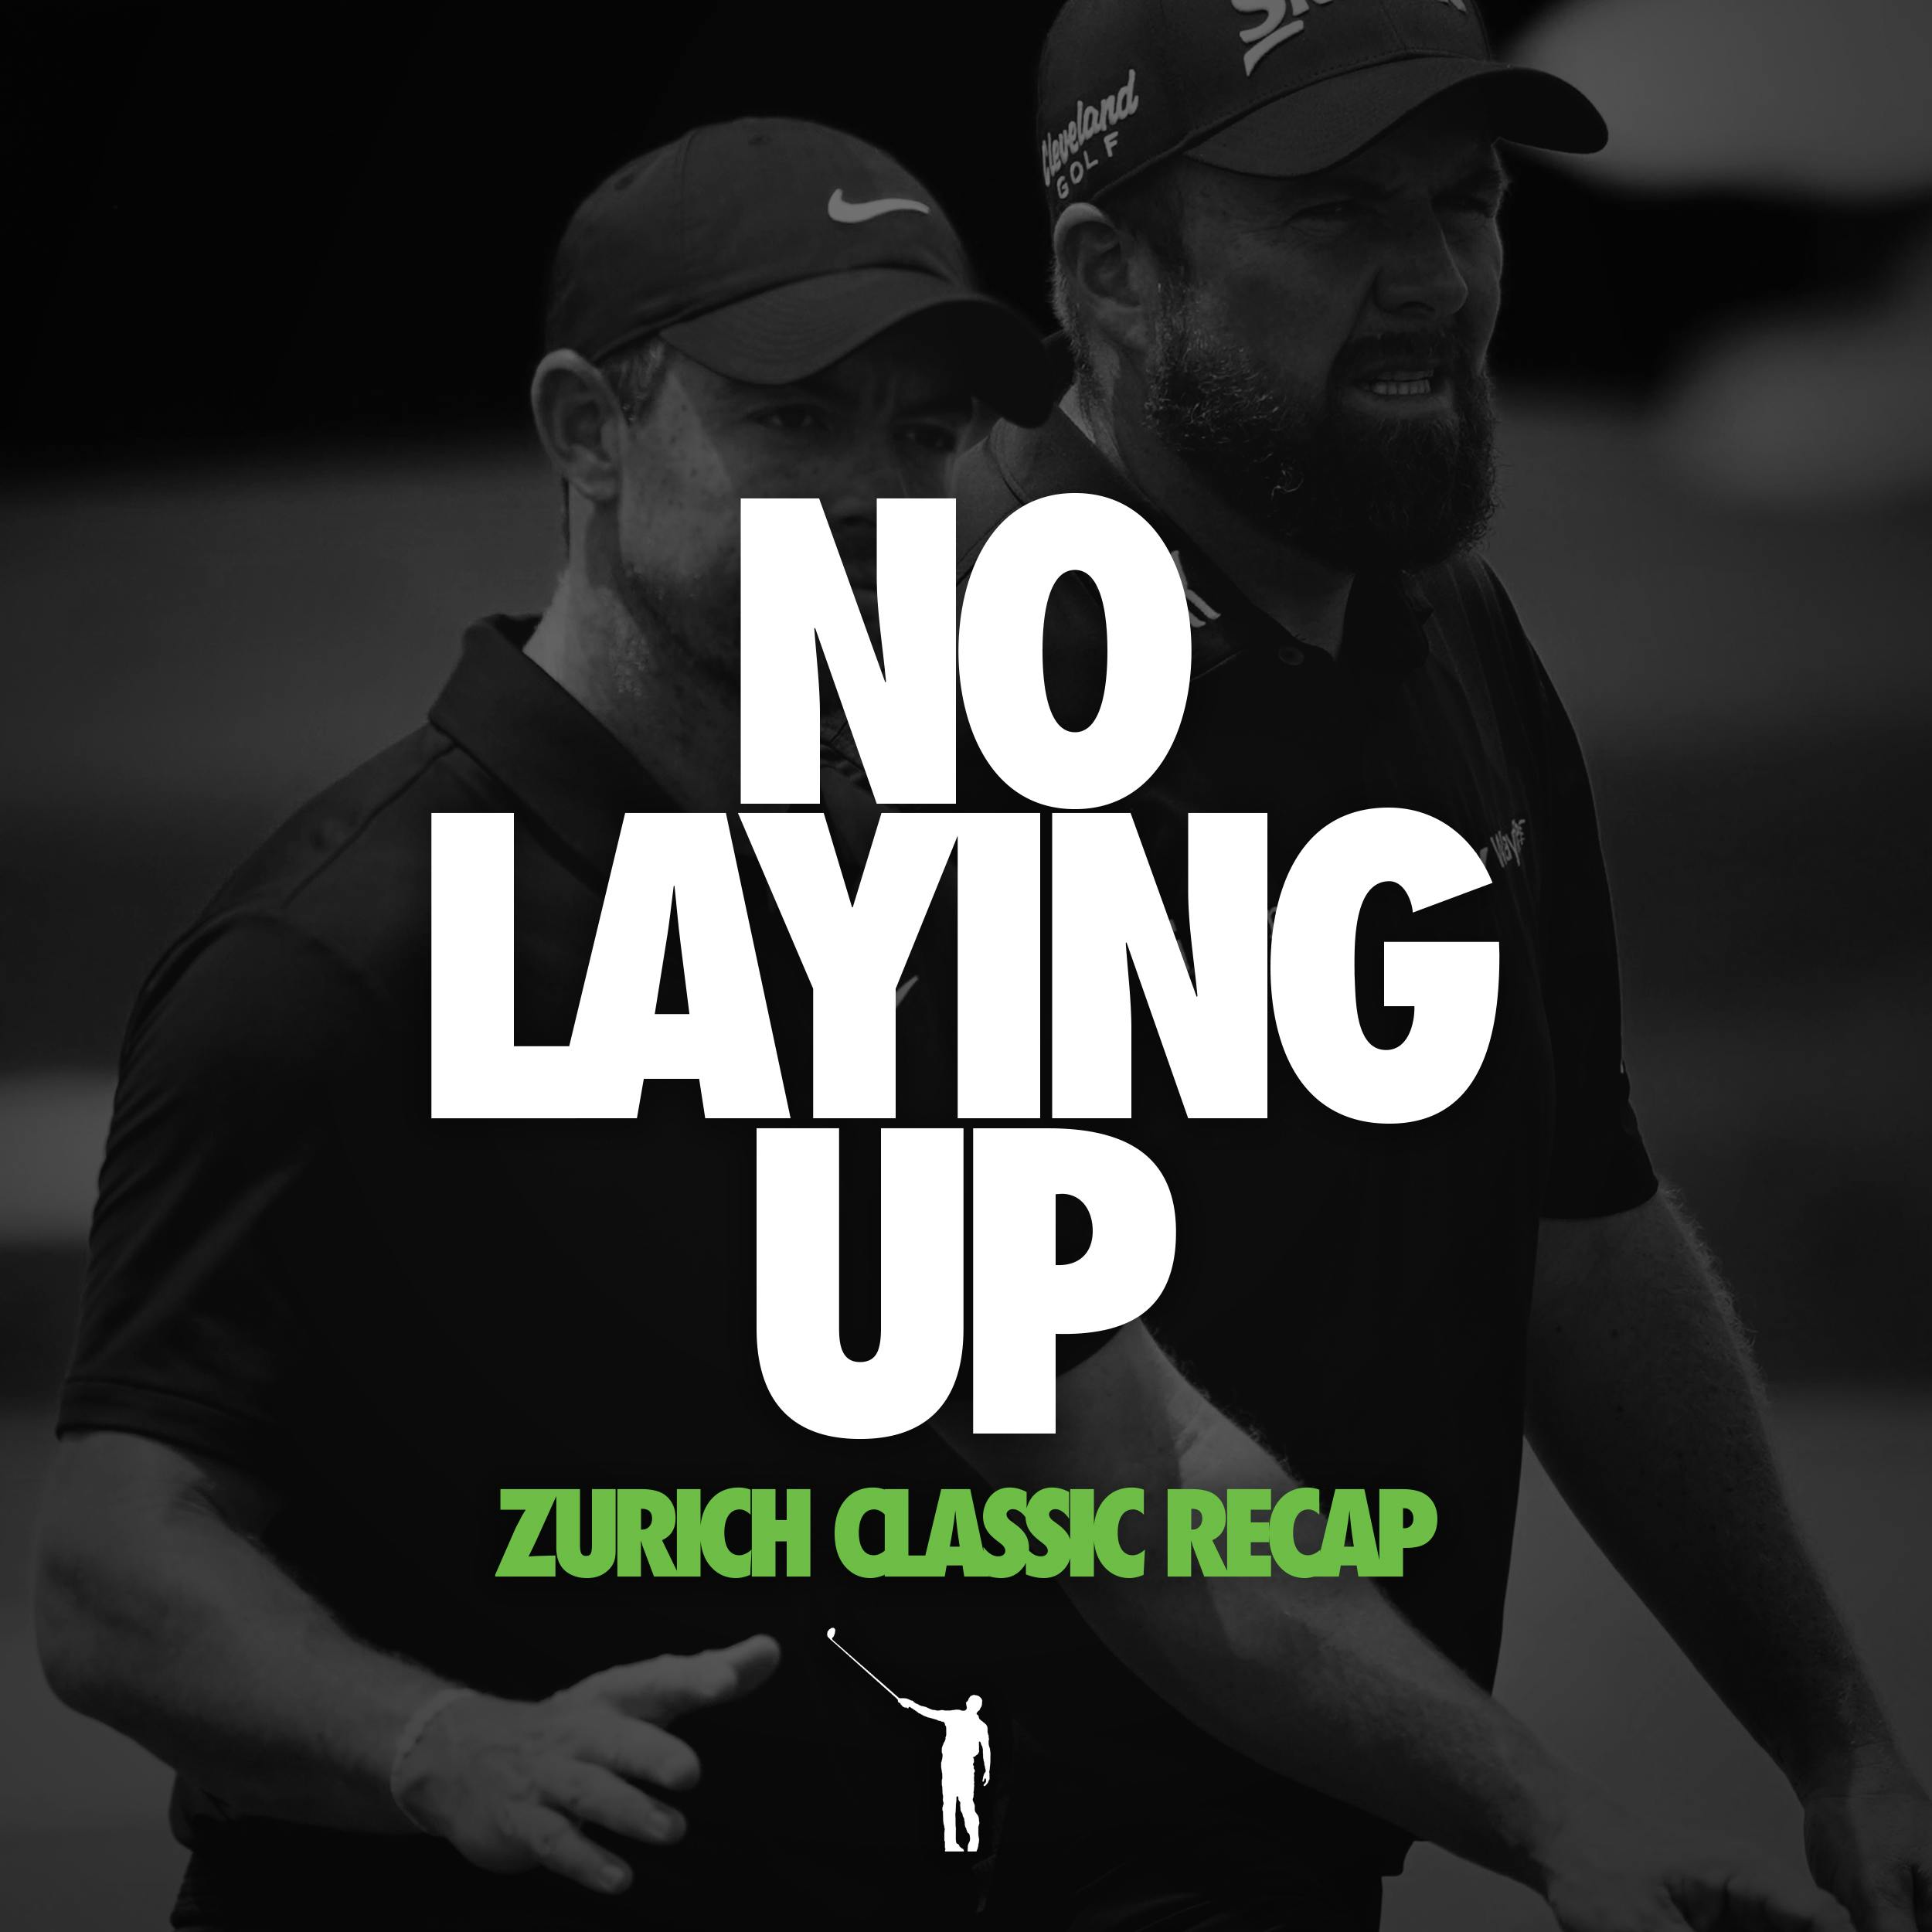 828 - Golfers as Quarterbacks, Rory/Lowry win the Zurich, LIV Adelaide, and Equity on the PGA Tour